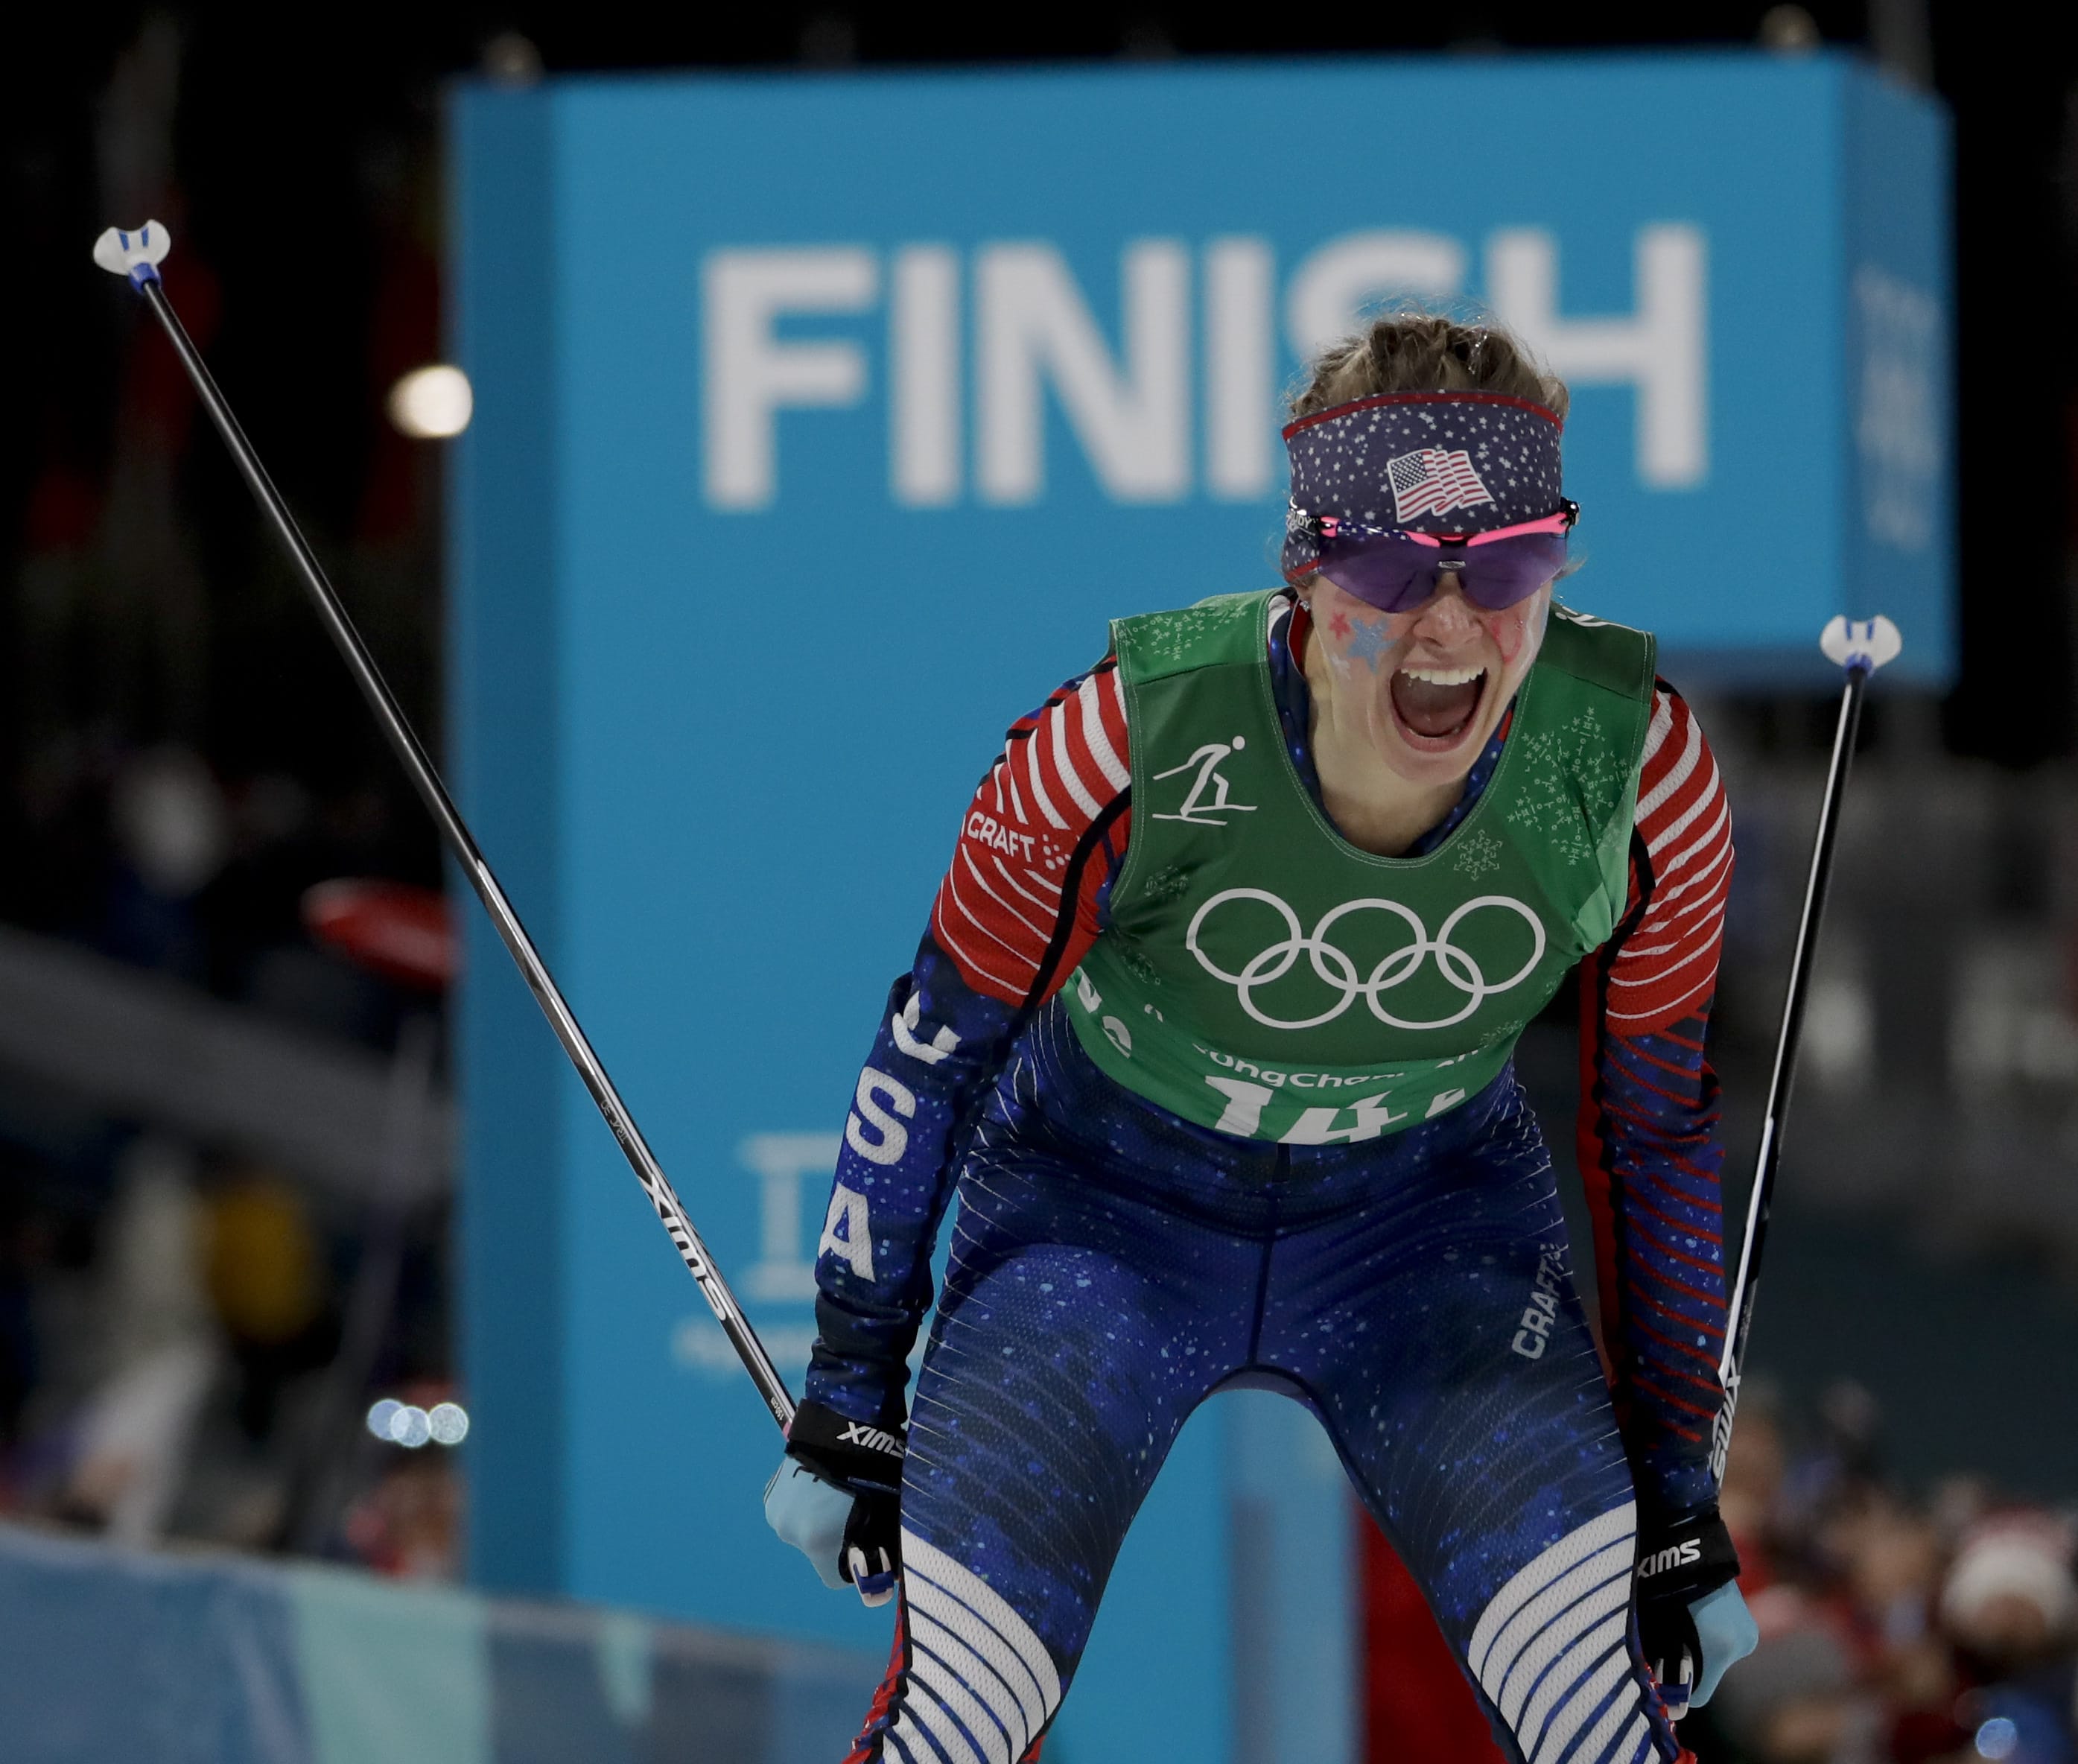 Jessica Diggins, of the United States, celebrates after winning the gold medal in the during women's team sprint freestyle cross-country skiing final at the 2018 Winter Olympics in Pyeongchang, South Korea, Wednesday, Feb. 21, 2018.